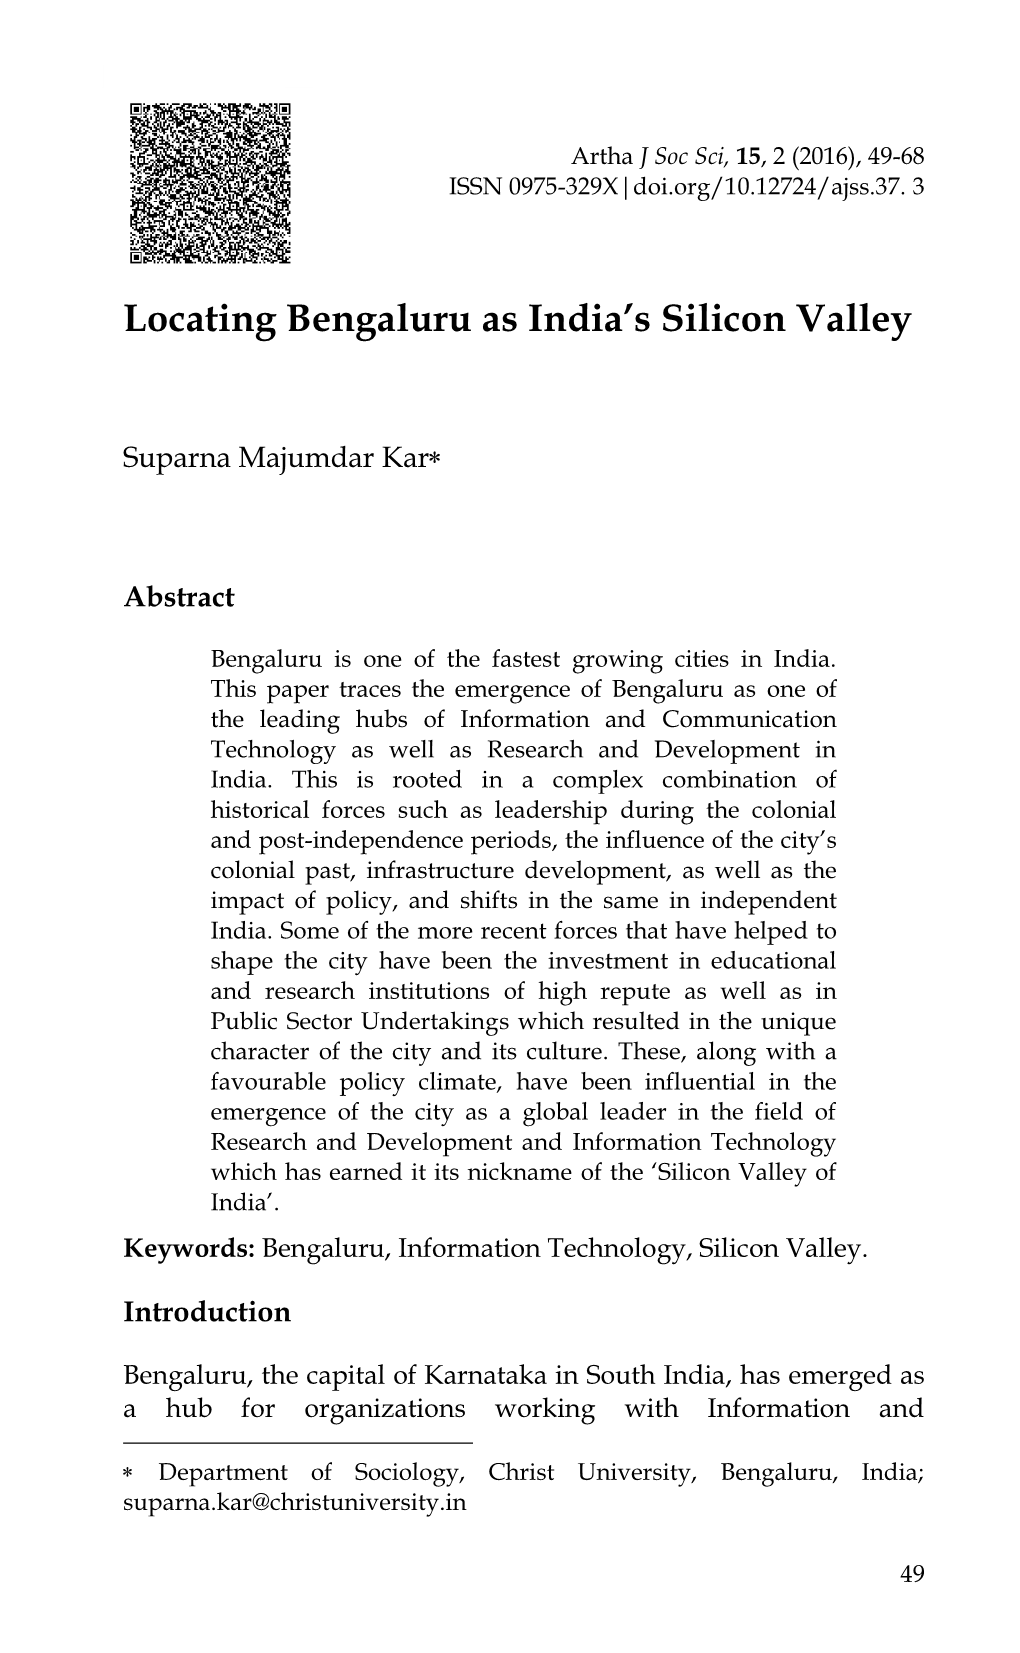 Locating Bengaluru As India's Silicon Valley